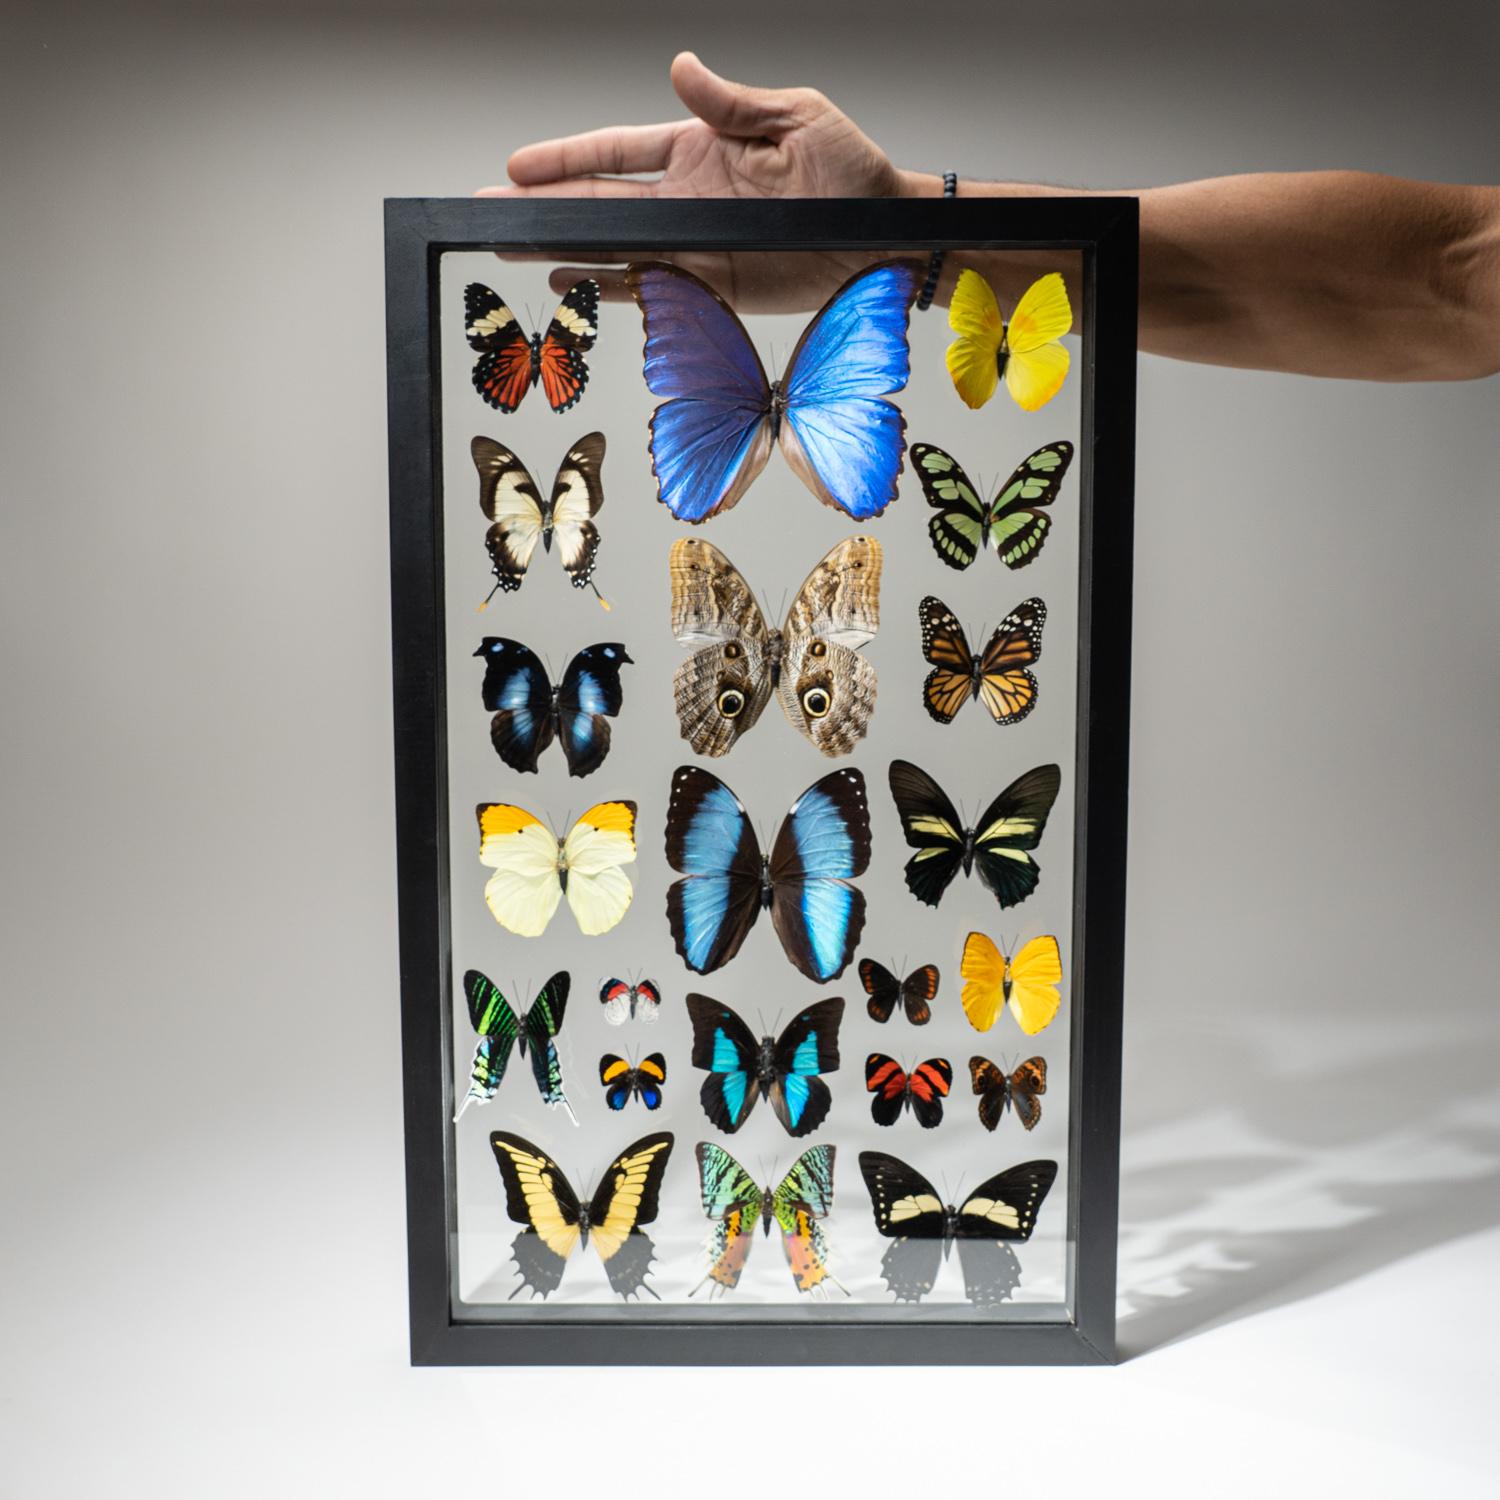 This incredible display includes a total of 22 genuine Peruvian butterflies. The frame includes a keyhole hook at the top for mounting the display on a wall. The butterflies in these frames are raised on butterfly farms in Peru. These butterflies